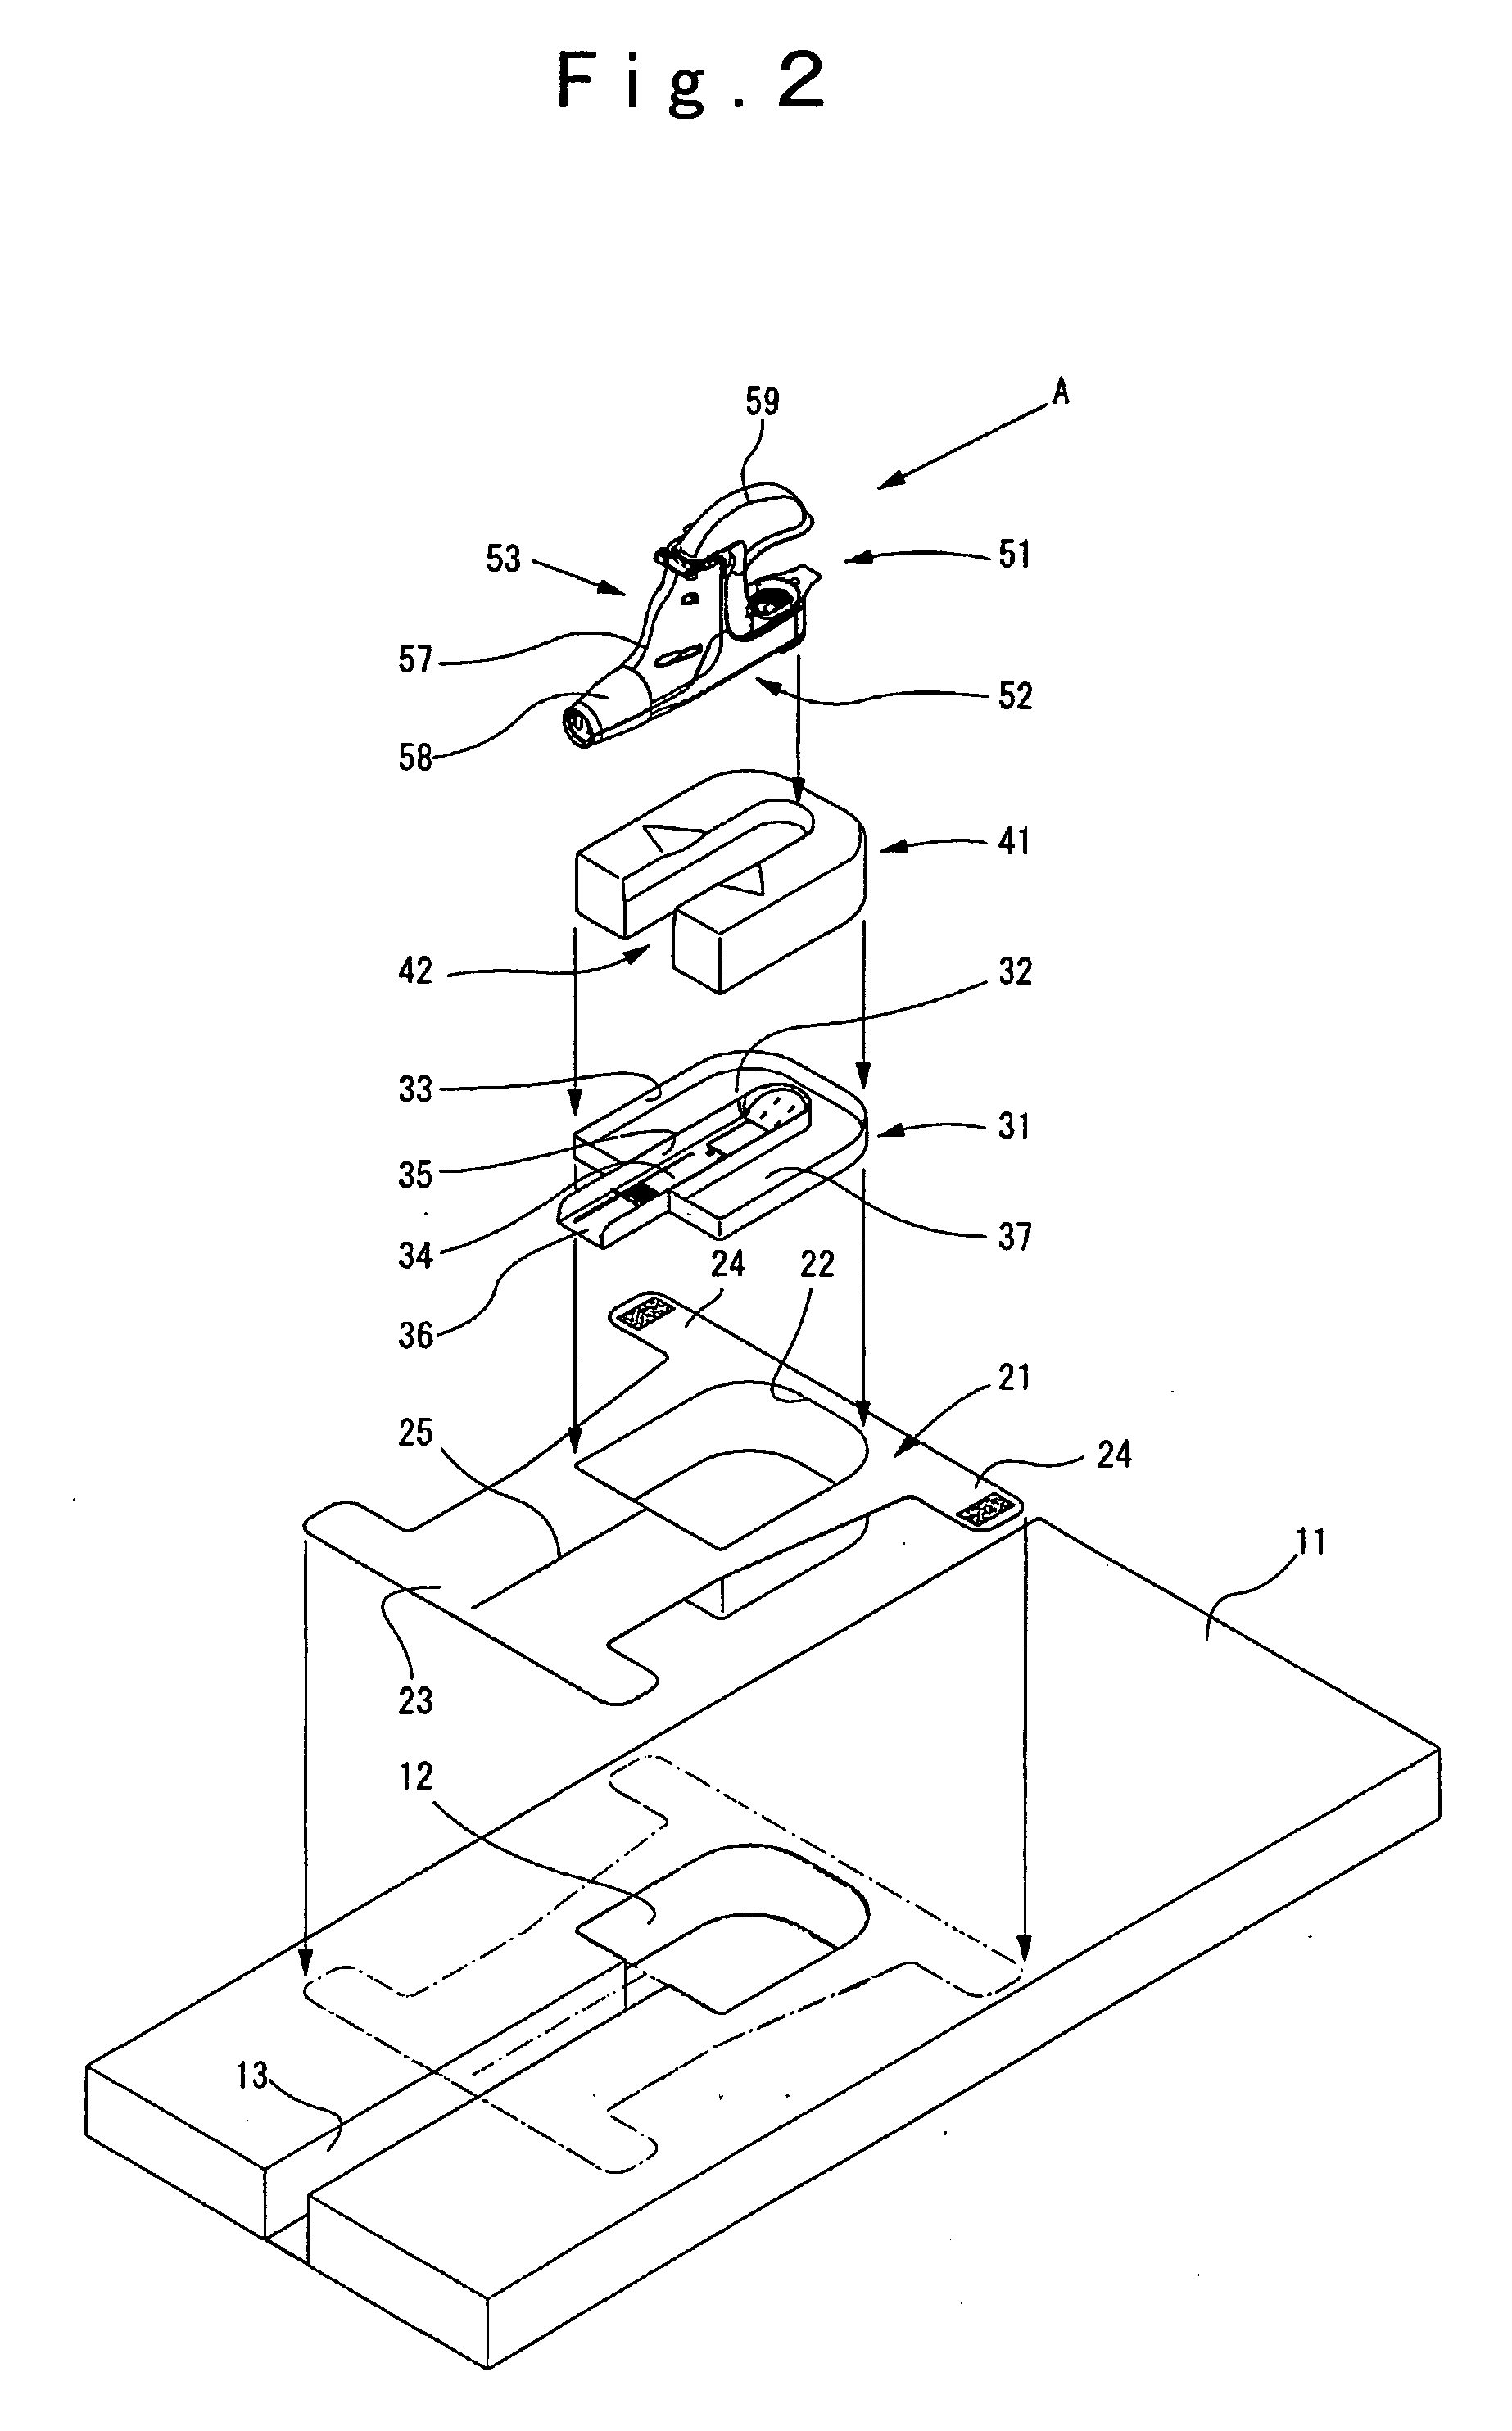 Automatic treating device for urination and defecation